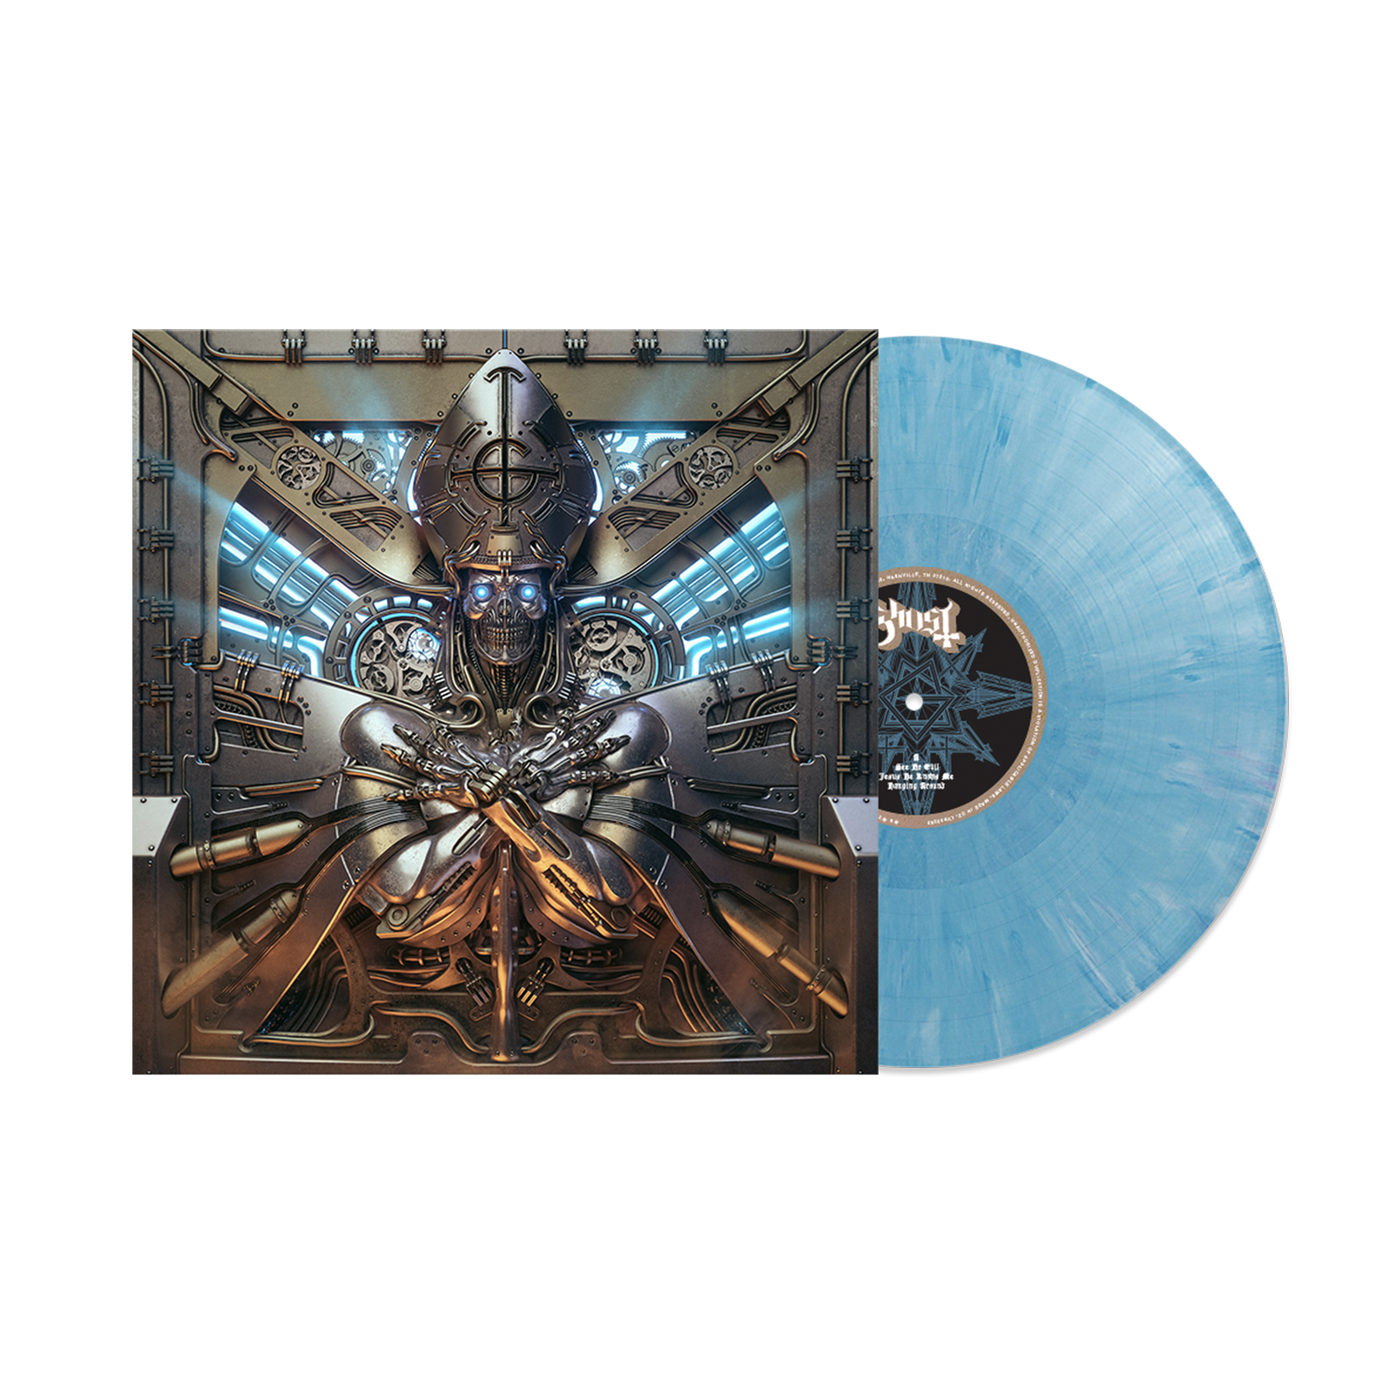 Ghost - Phantomime Ghost + LV Exclusive Colored Vinyl (Blue Sky Colored Vinyl)